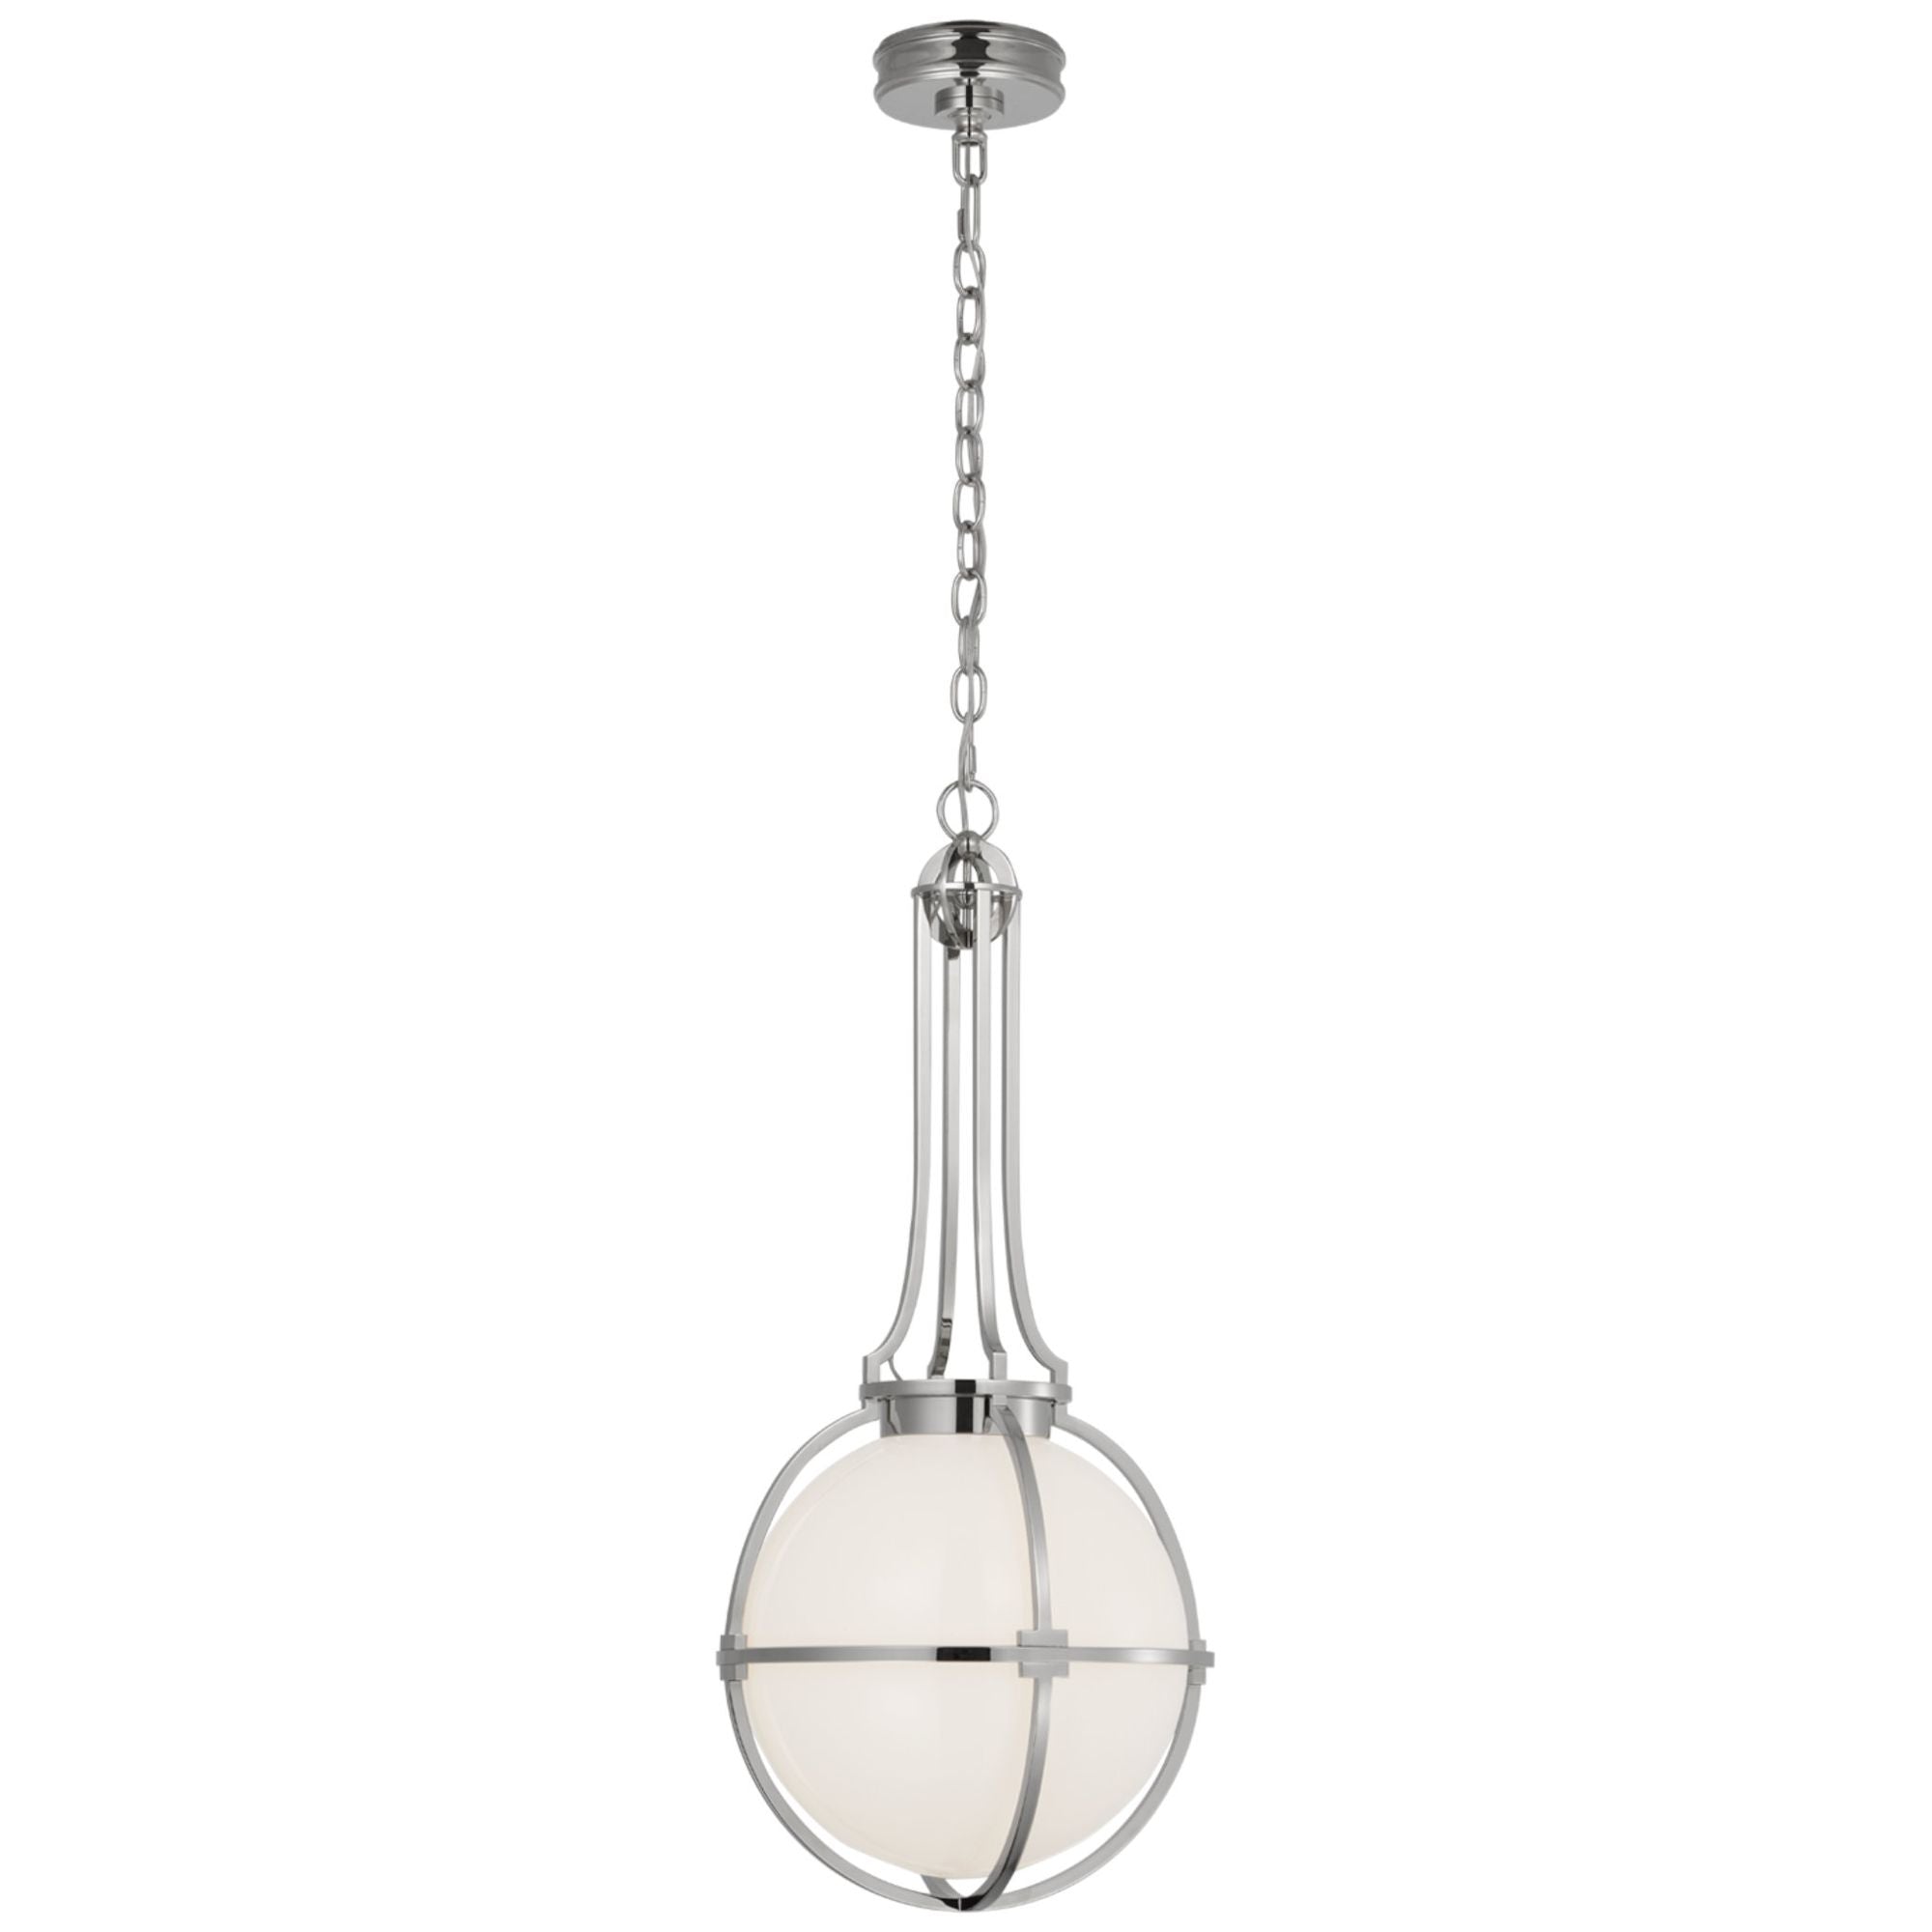 Chapman & Myers Gracie Medium Captured Globe Pendant in Polished Nickel with White Glass